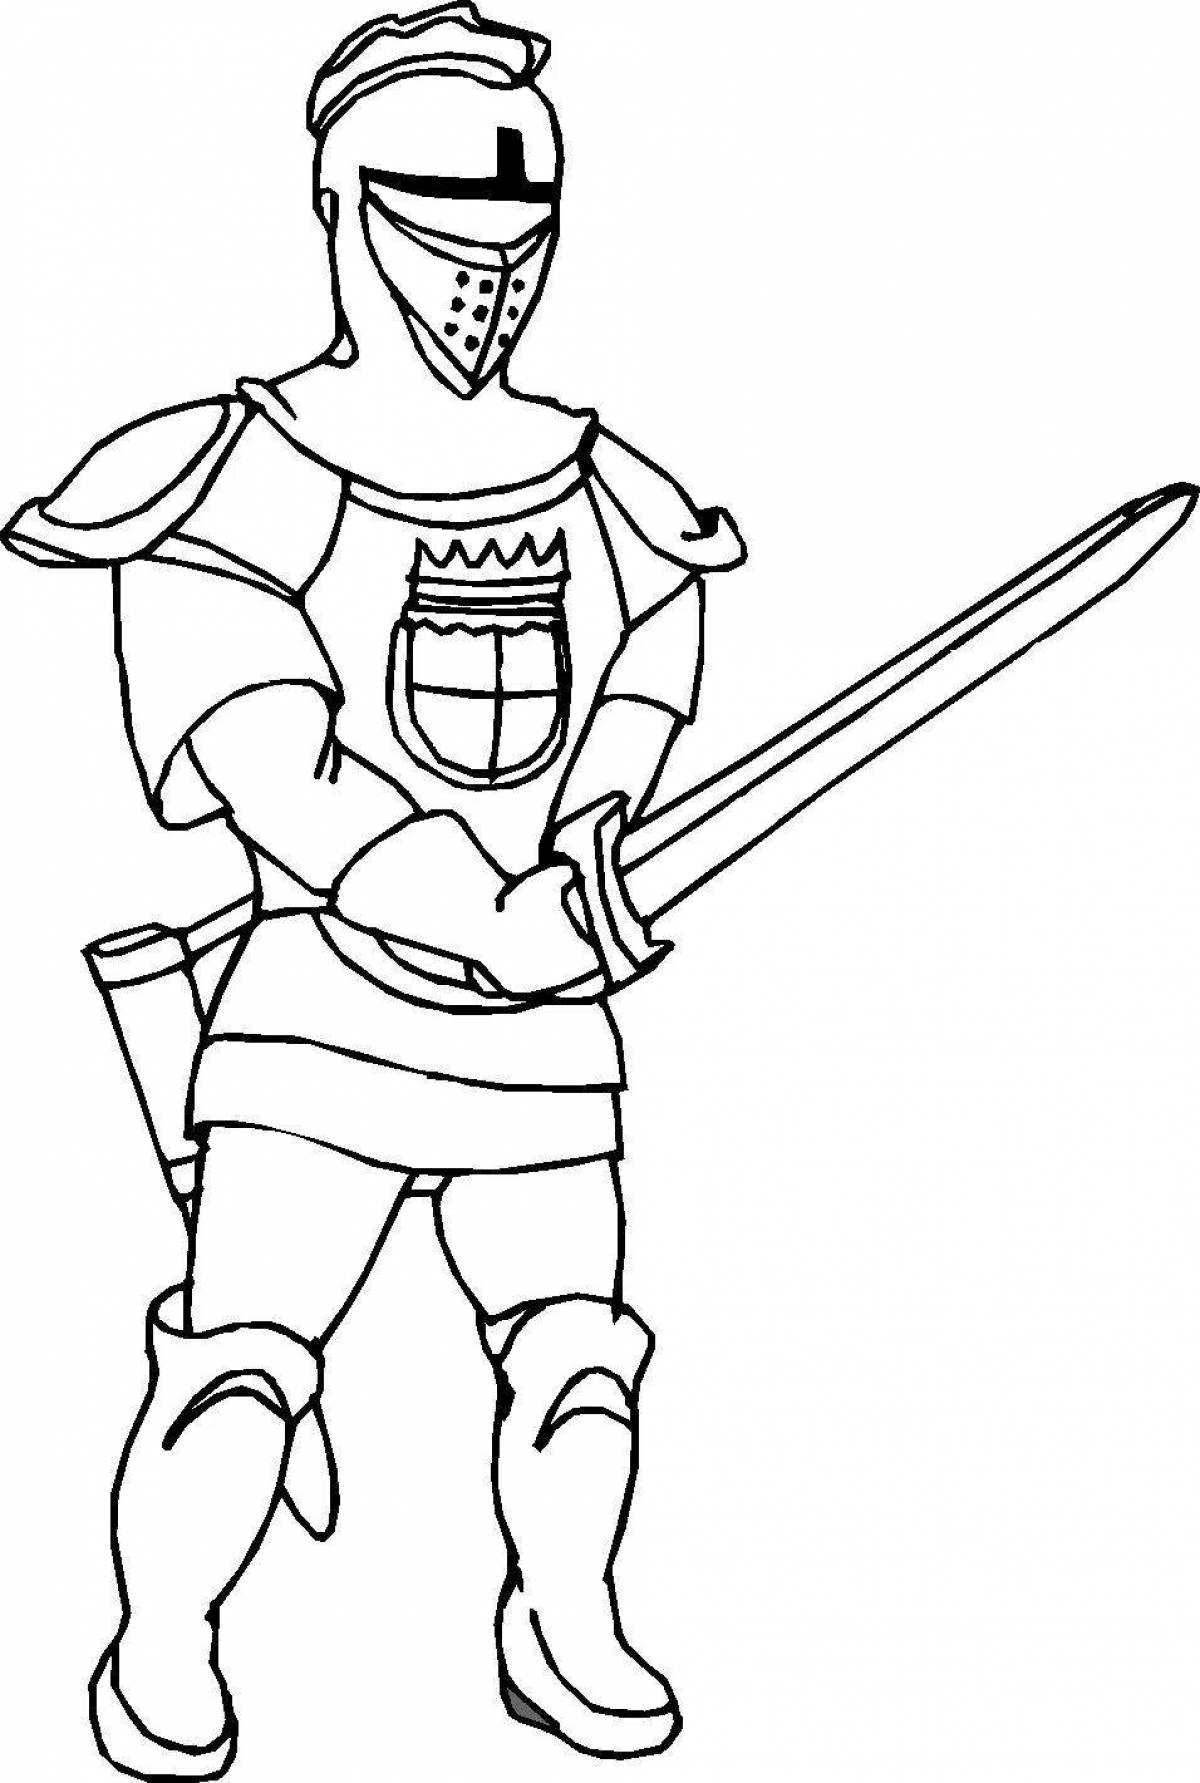 Major coloring book for knight boys